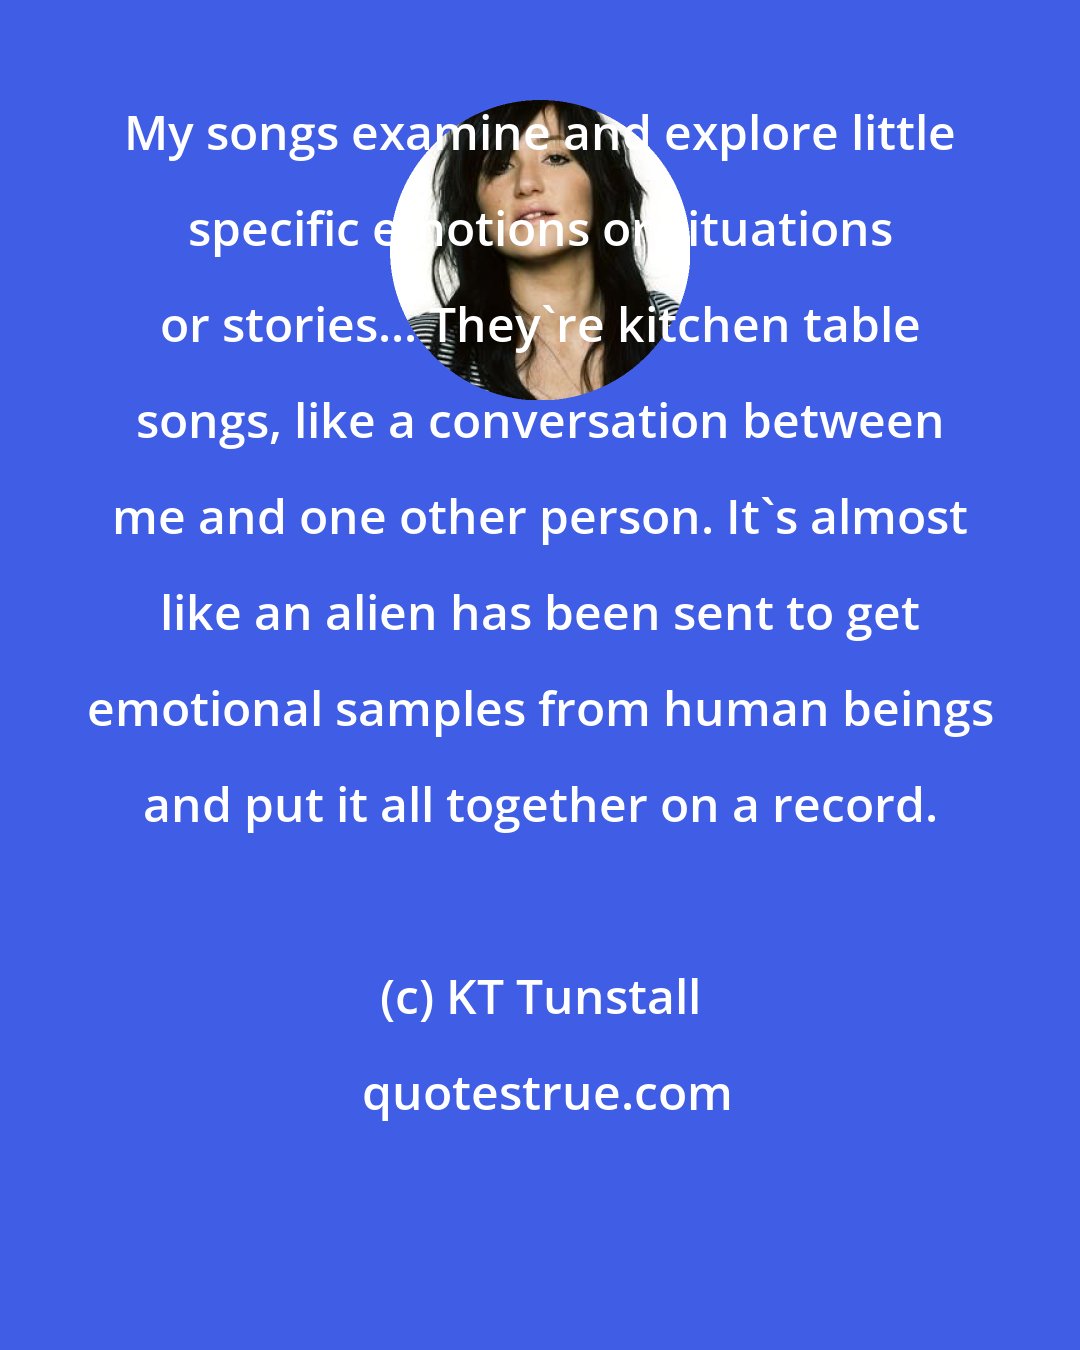 KT Tunstall: My songs examine and explore little specific emotions or situations or stories... They're kitchen table songs, like a conversation between me and one other person. It's almost like an alien has been sent to get emotional samples from human beings and put it all together on a record.